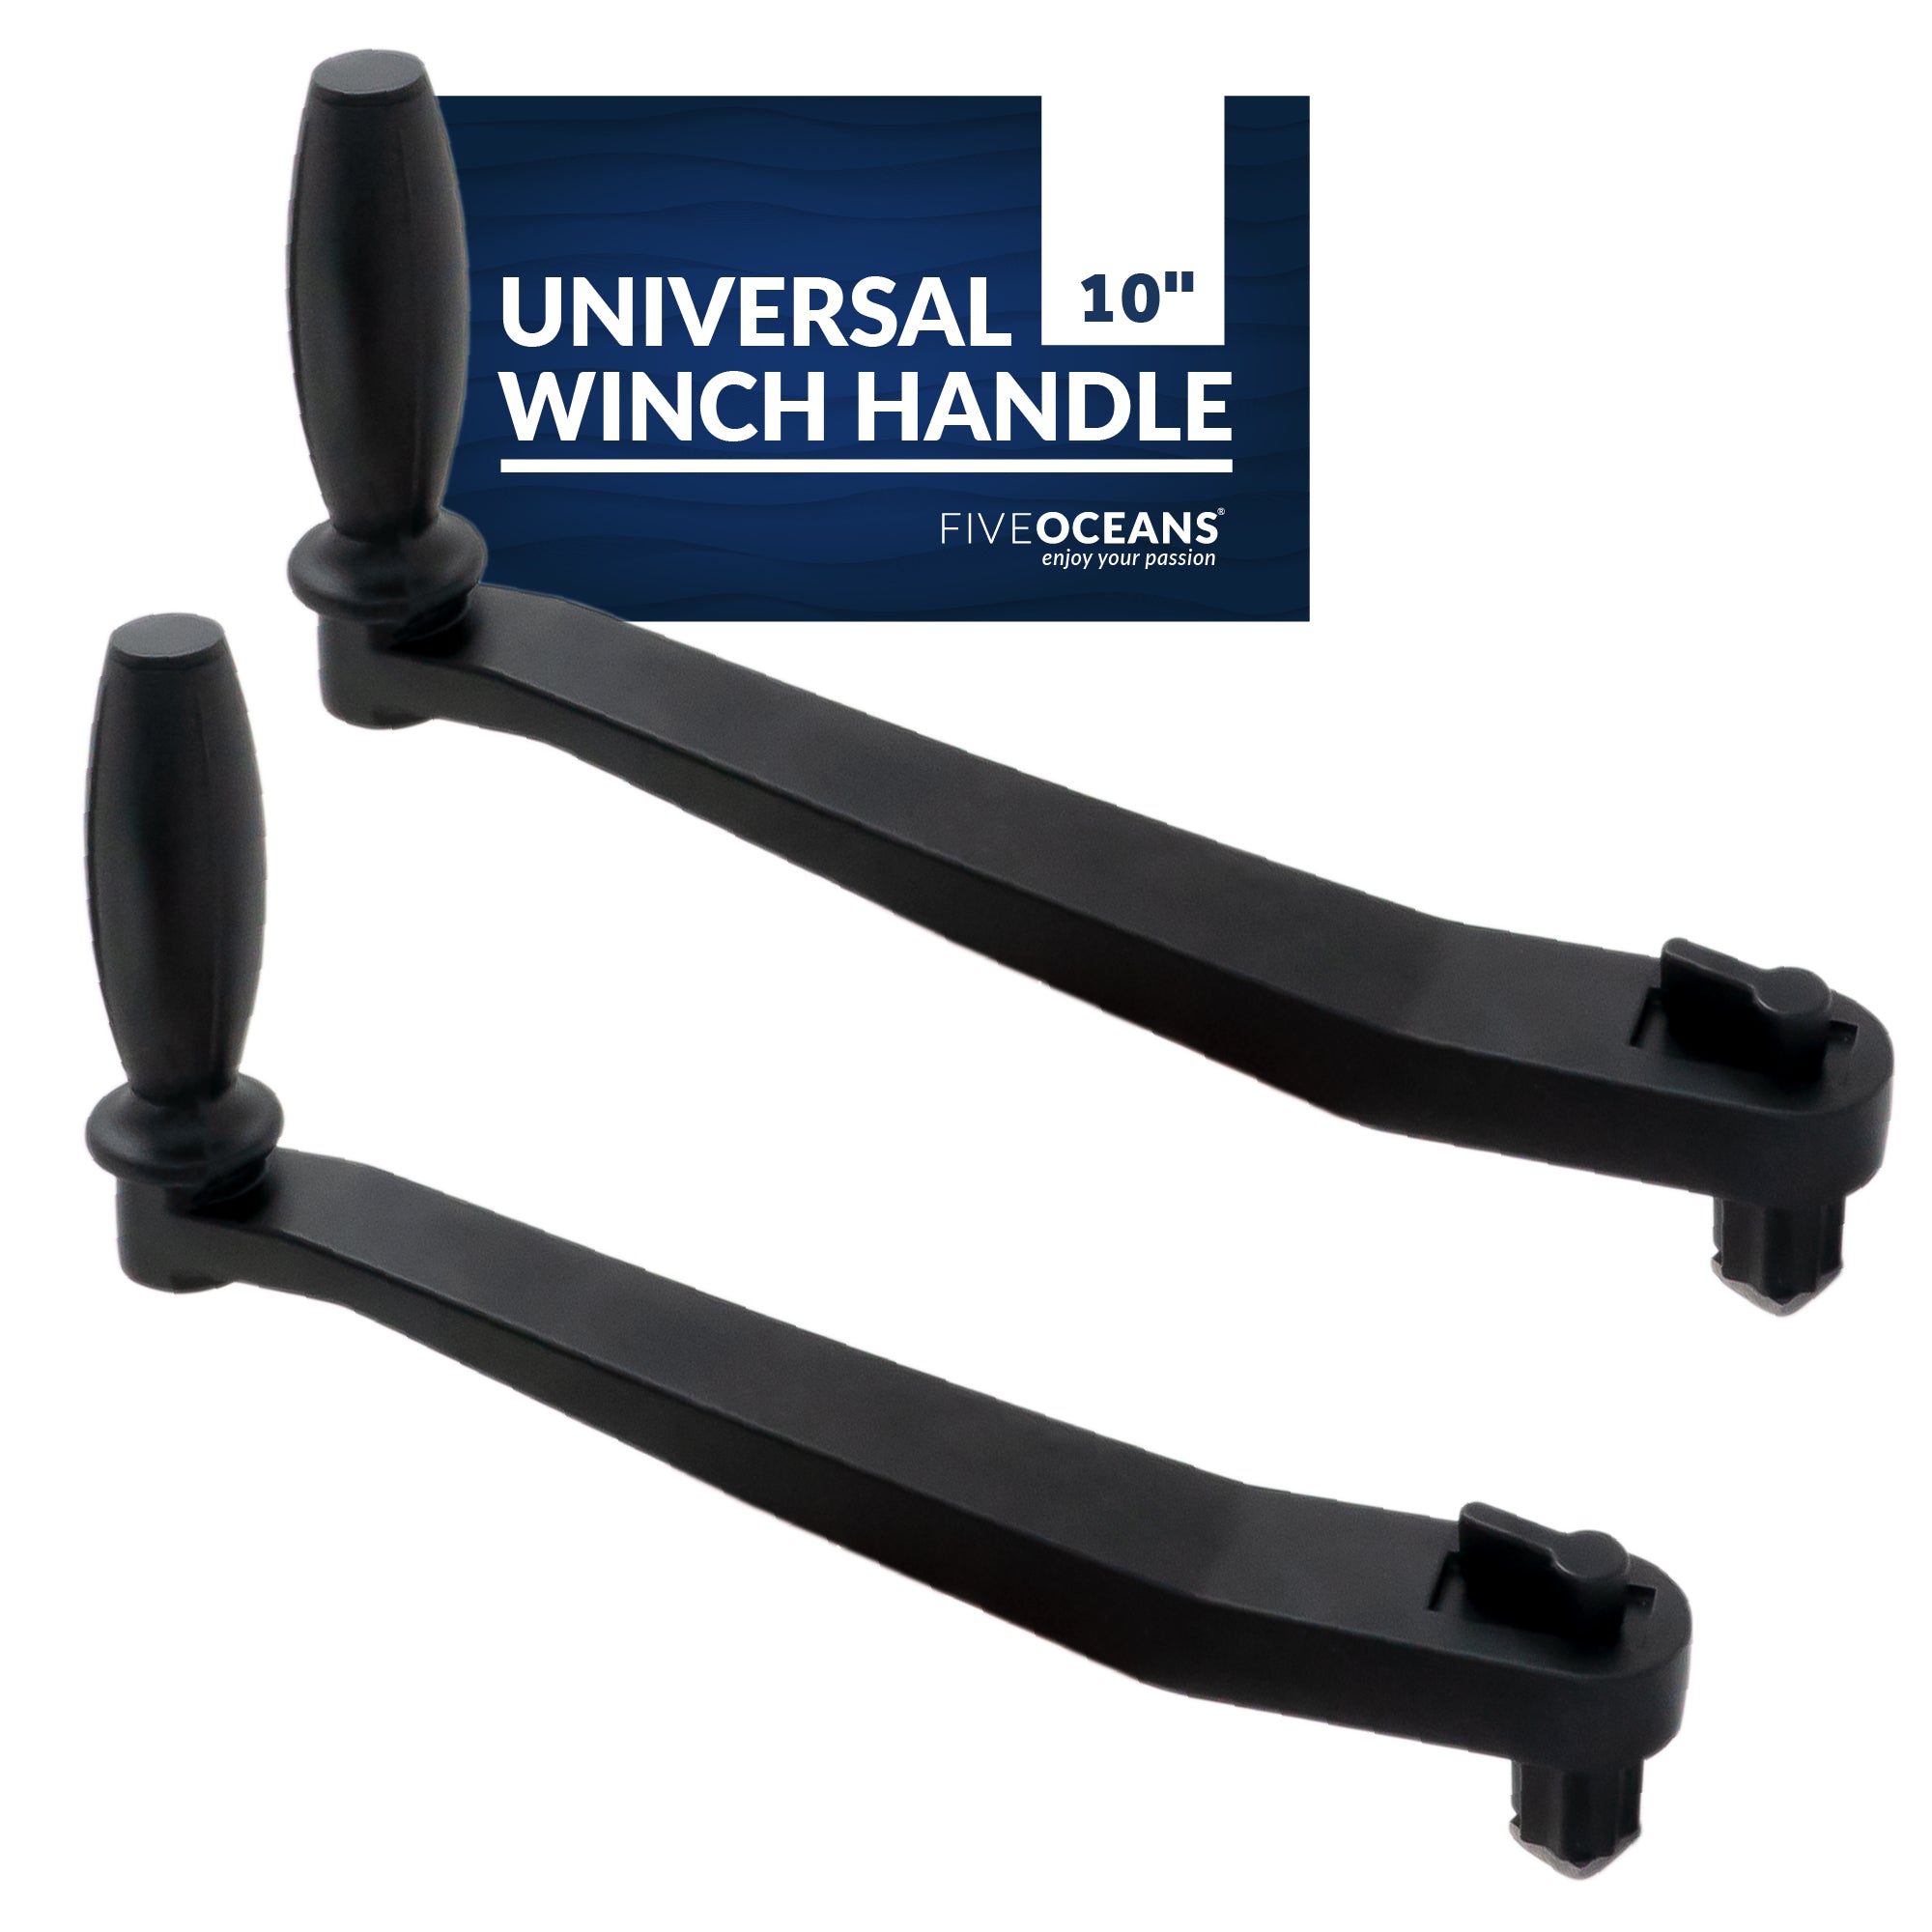 Universal Lock-in Style Winch Handle 10", 2-Pack - FO3514-M2